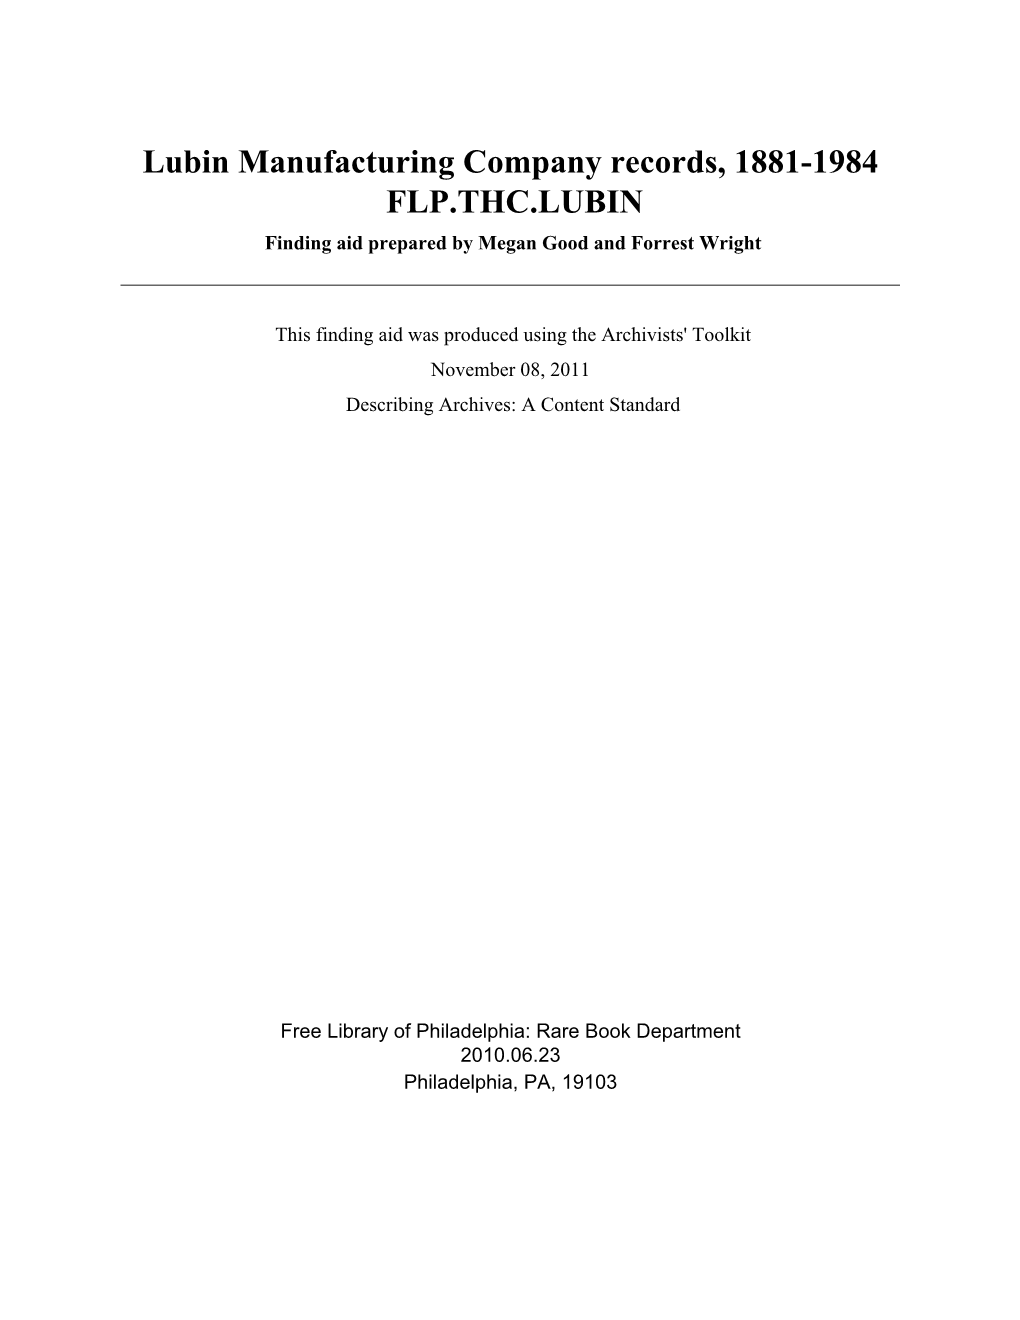 Lubin Manufacturing Company Records, 1881-1984 FLP.THC.LUBIN Finding Aid Prepared by Megan Good and Forrest Wright